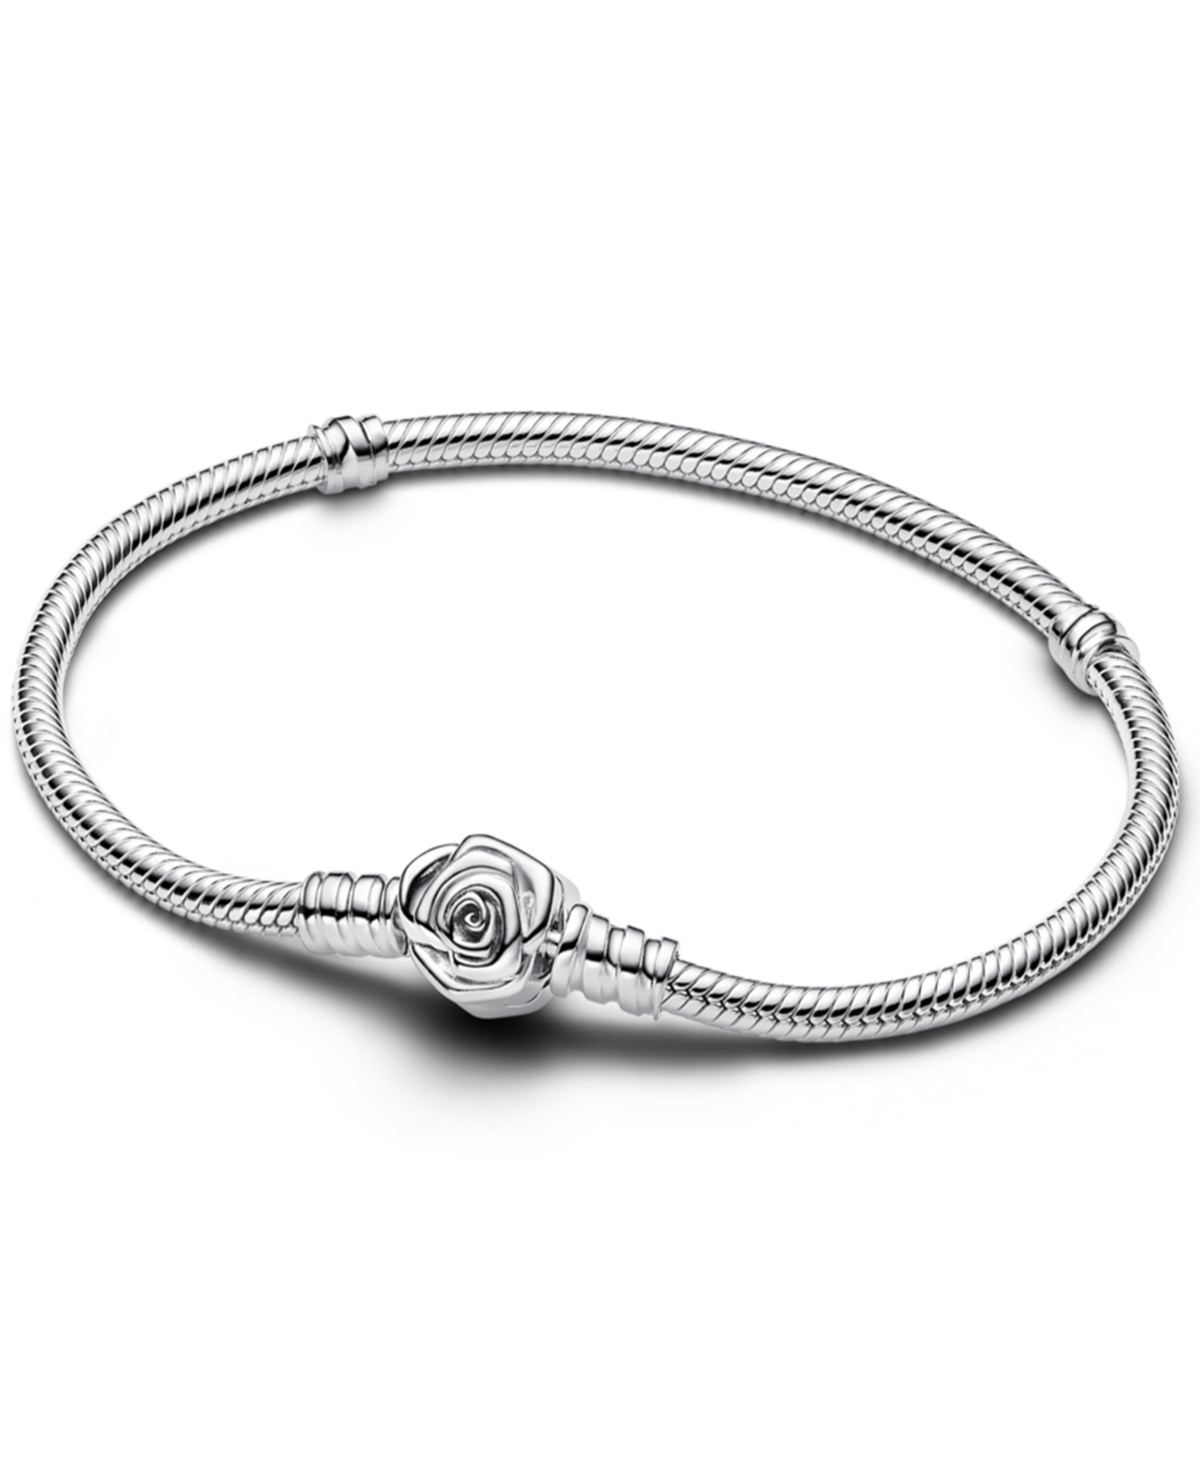 Rose Bloom Clasp Snake Chain Bracelet in Sterling Silver - Silver